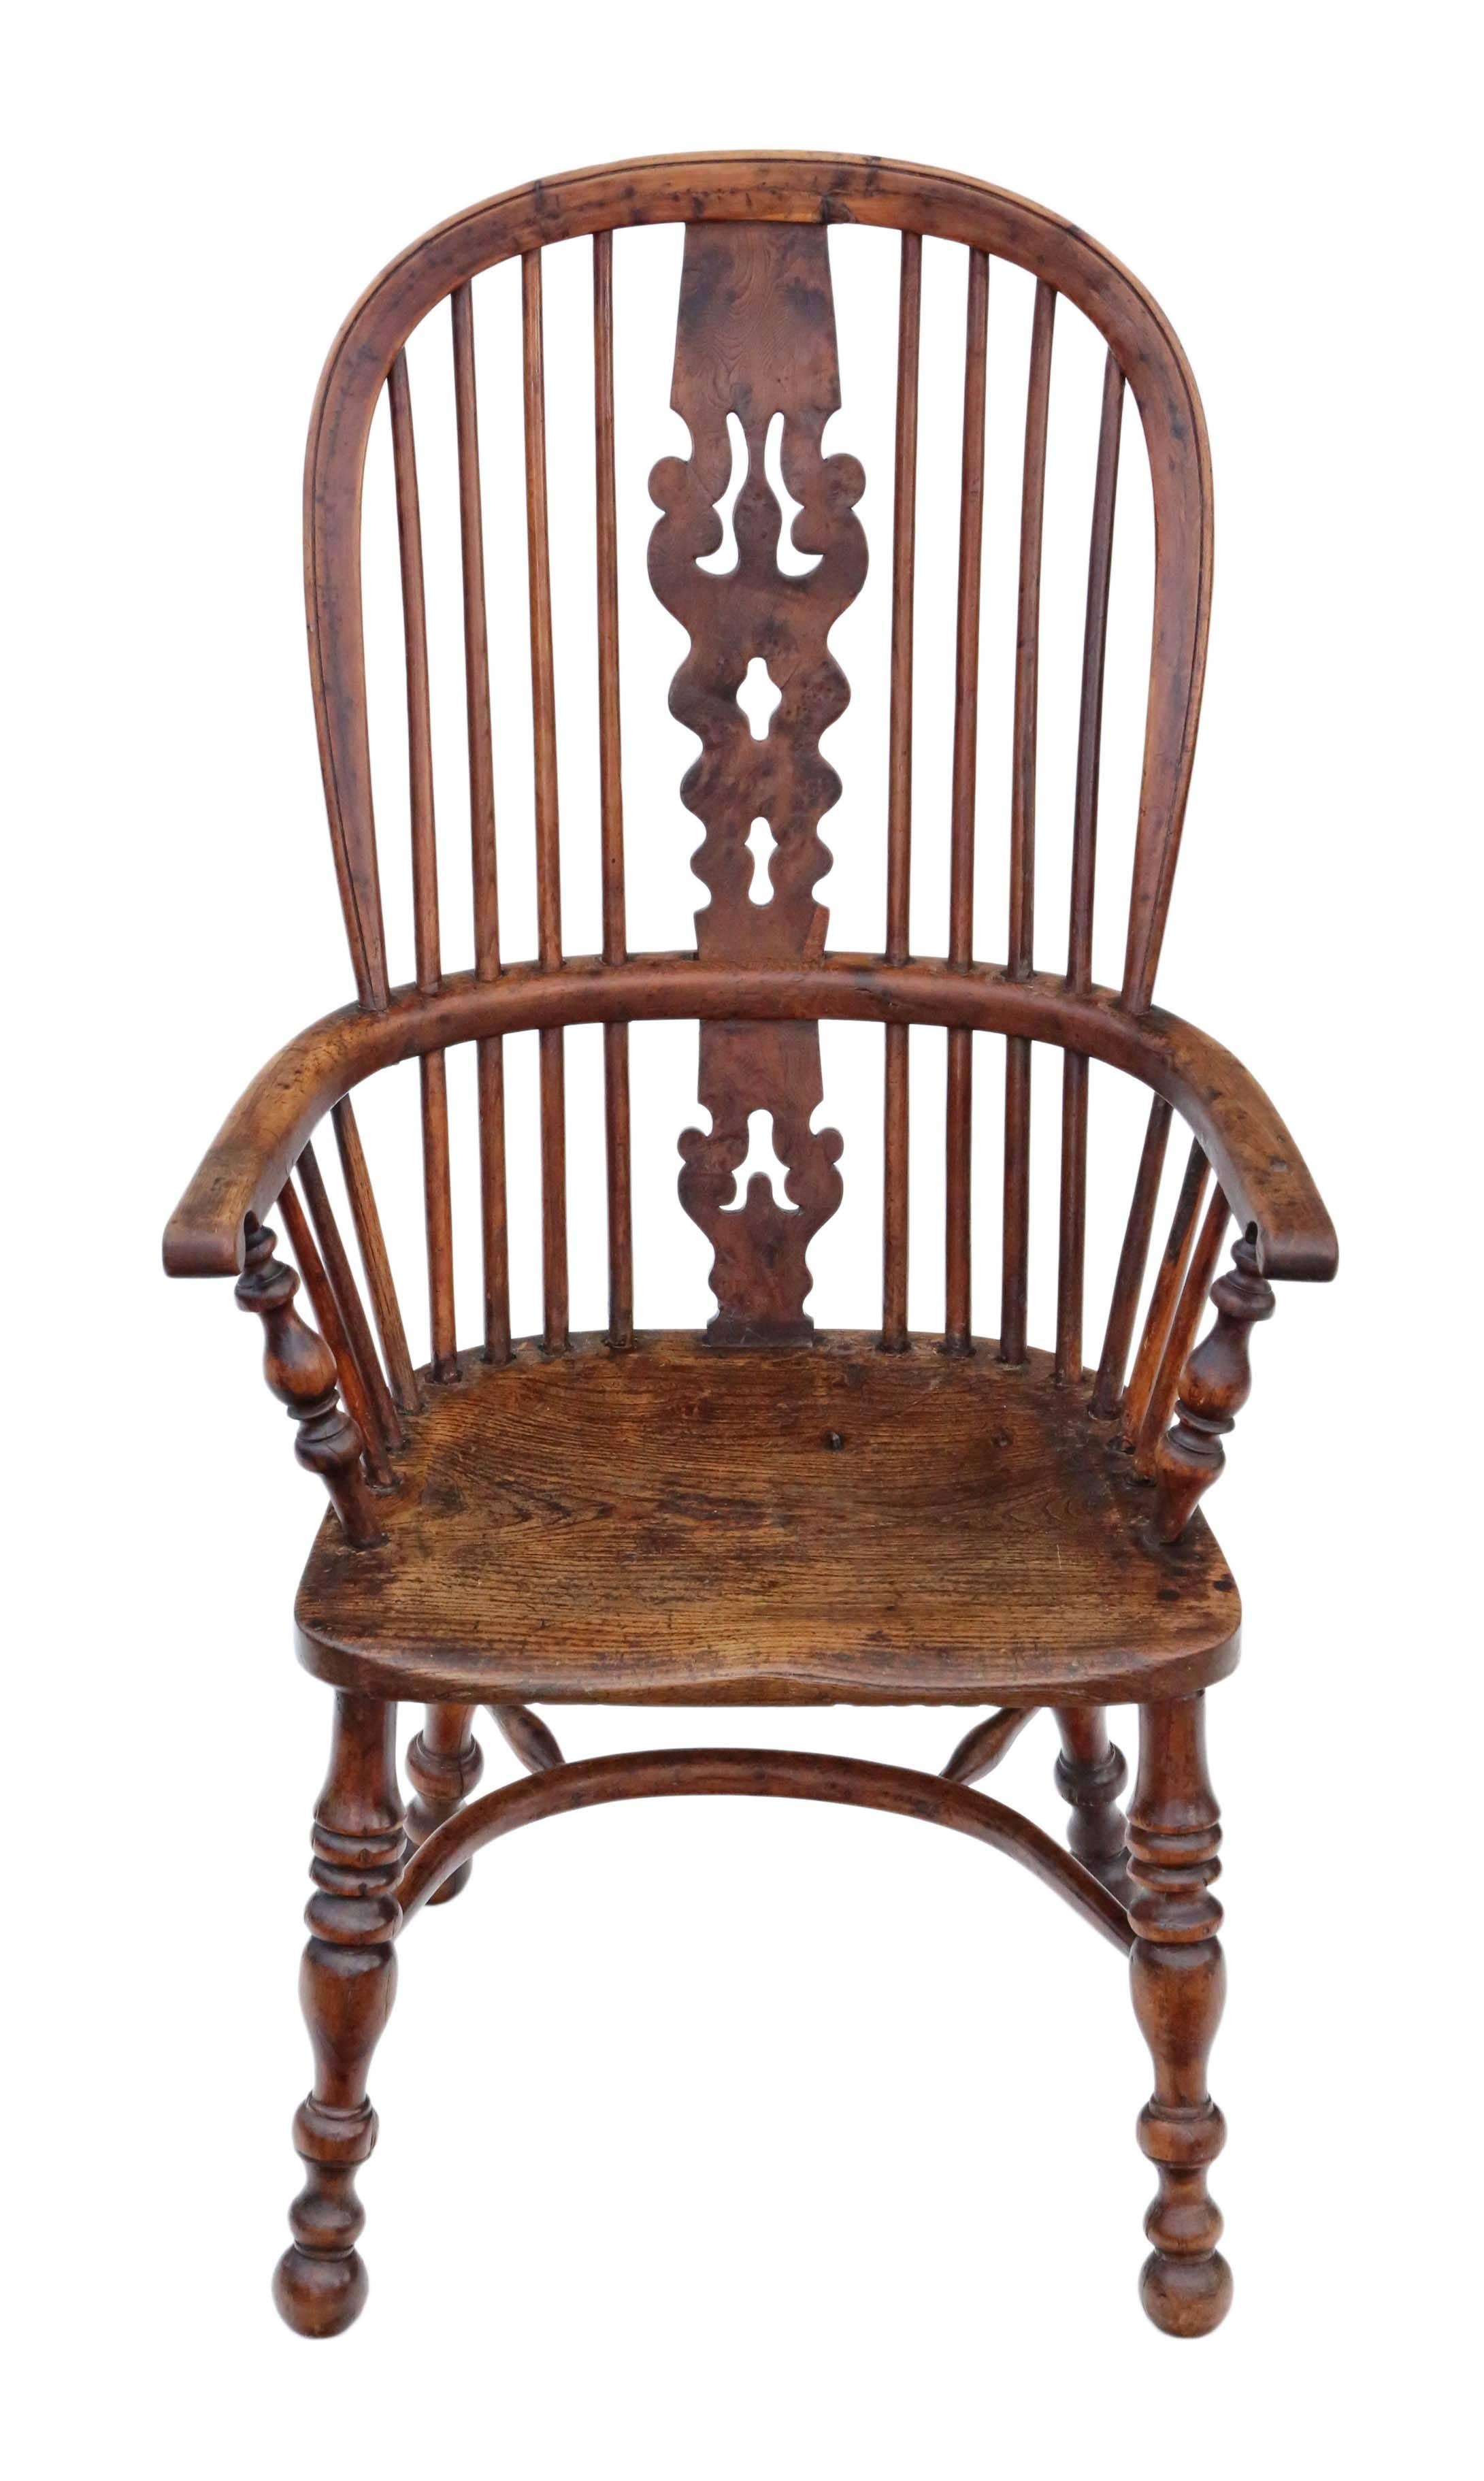 Antique quality Victorian yew & elm Windsor chair armchair dining, circa 1840.

Solid, no loose joints and no woodworm. Full of age, character and charm. A very decorative chair... so rare and sought after in yew.

Would look great in the right